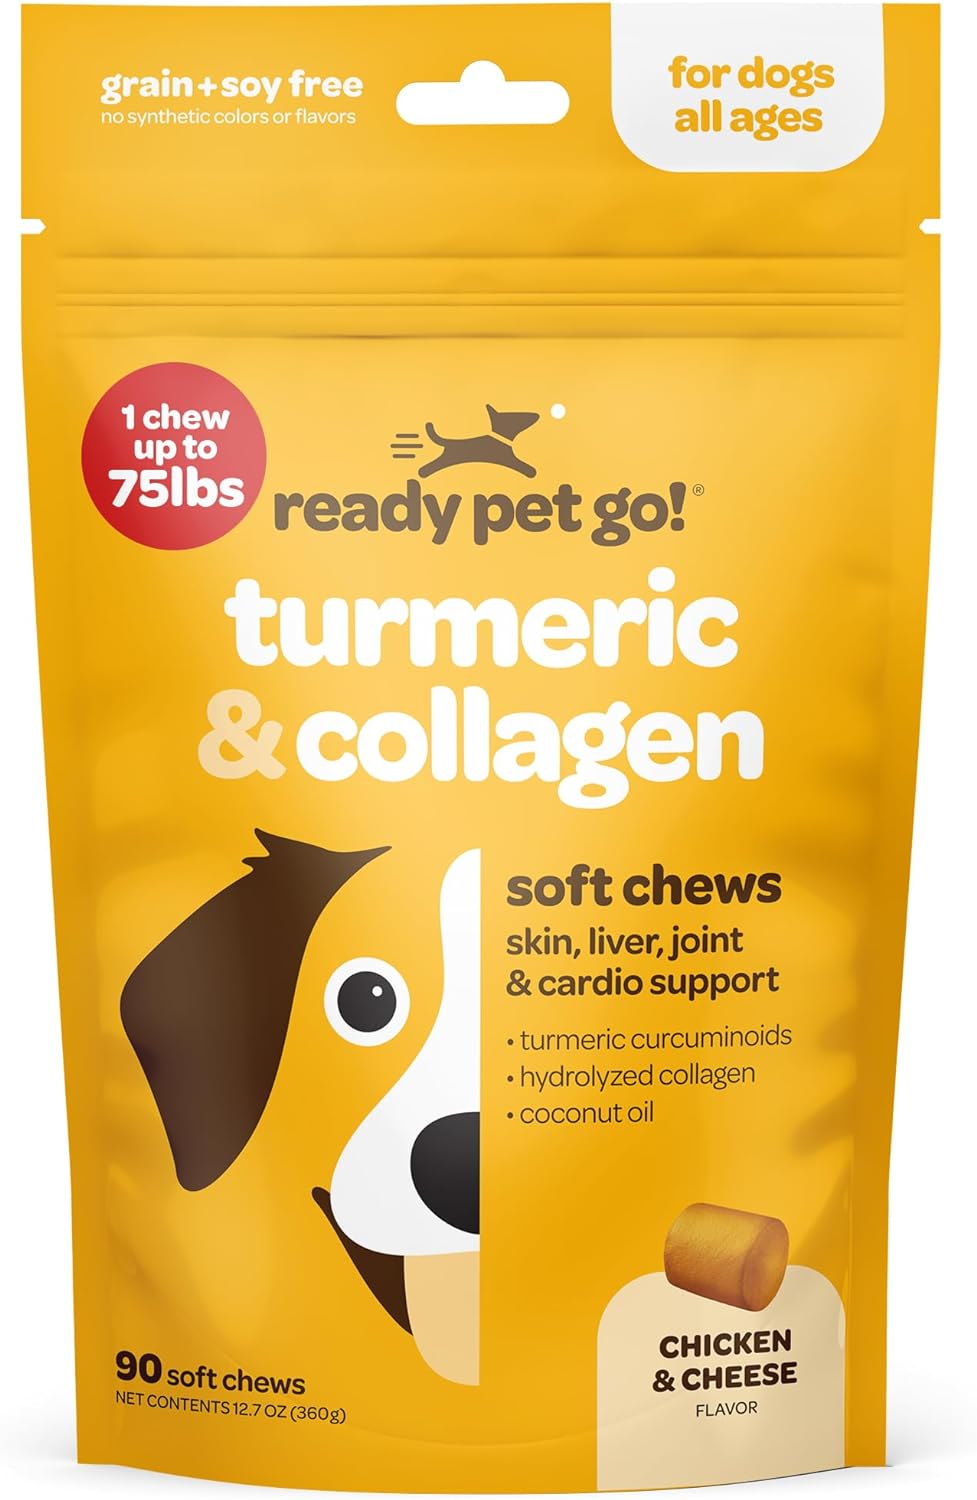 Turmeric Collagen Chews for Mobility, Joint Comfort, Skin, Liver & Joint Support Supplement - Hip and Joint Supplement for Dogs - Turmeric for Dogs, Grain & Soy Free Pets Treats - 90 Healthy Pet Chews